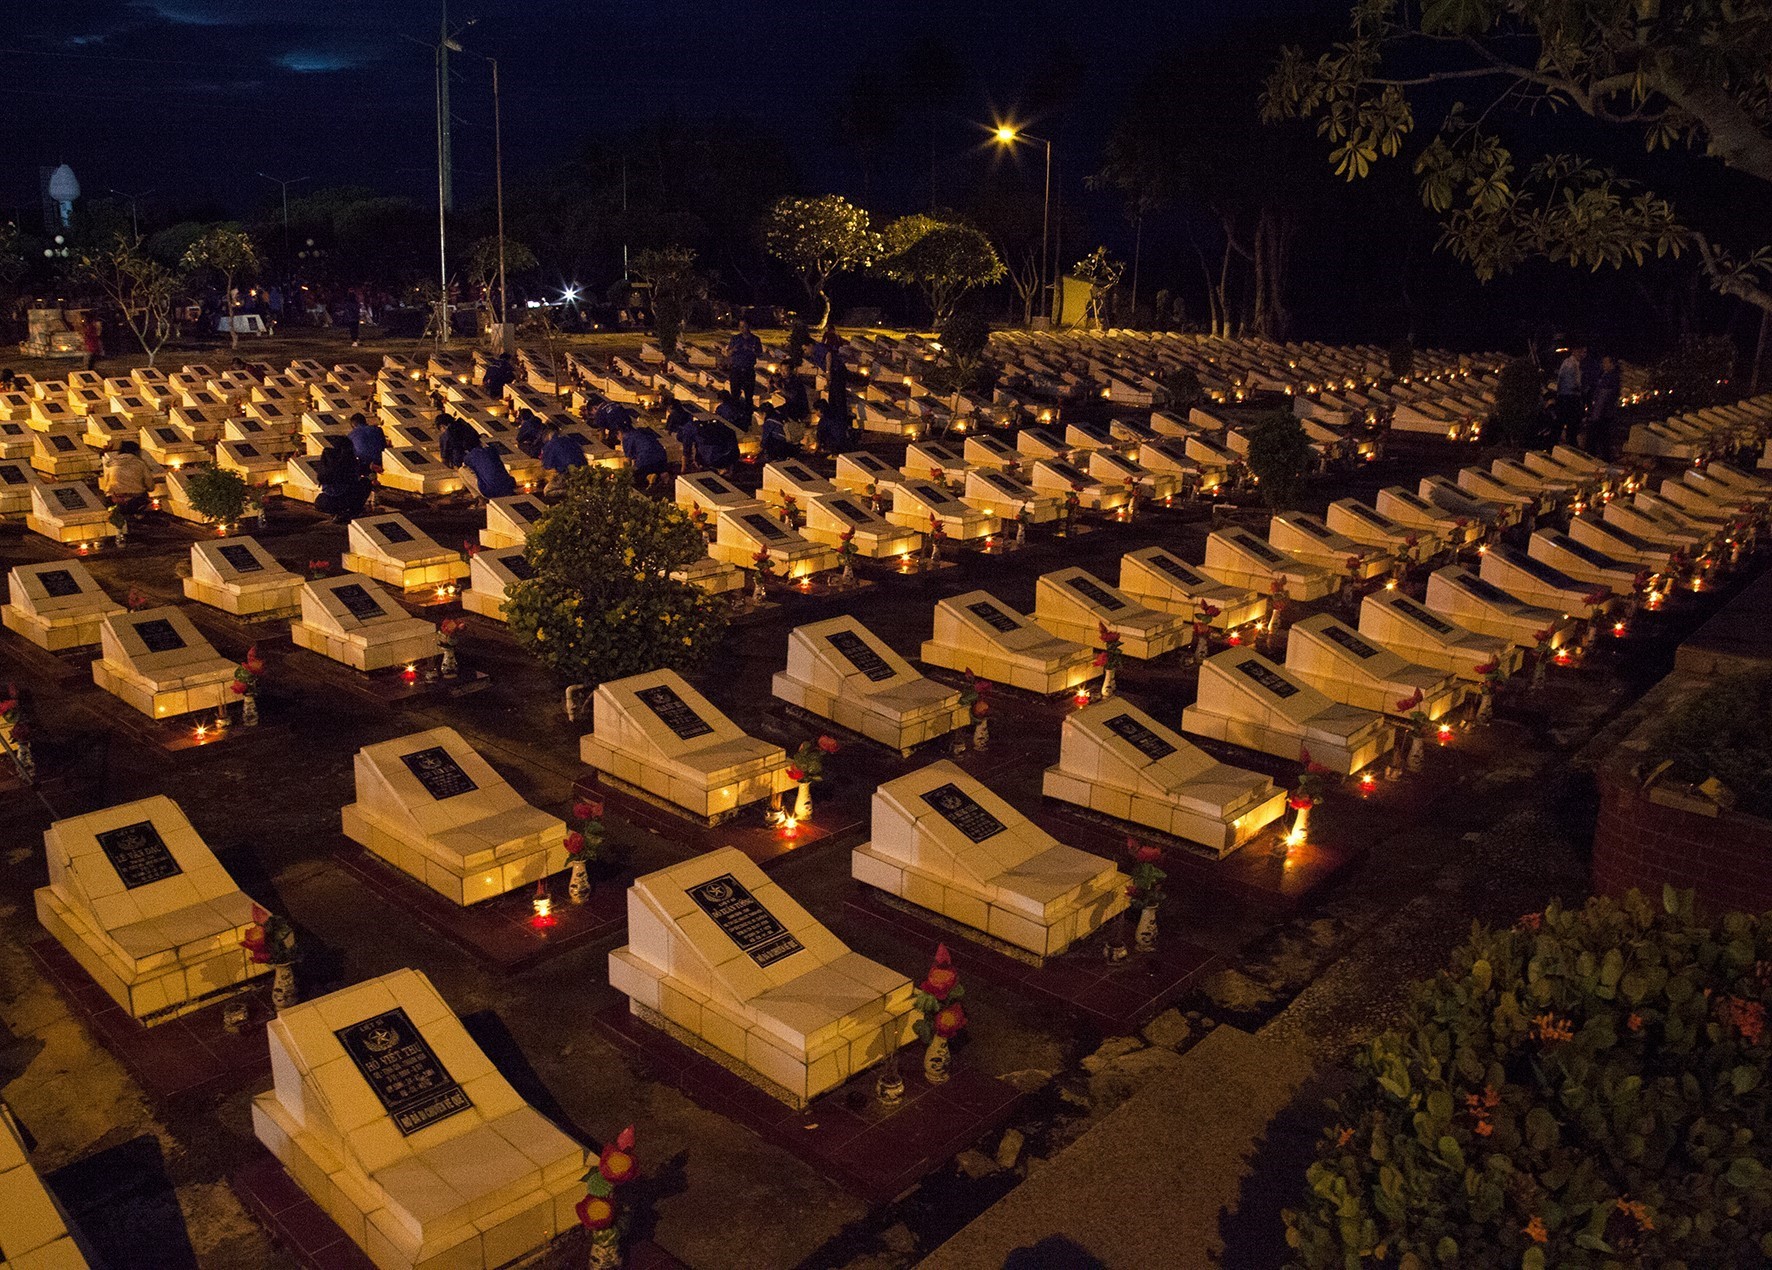 Candles are lit in commemoration of martyrs at the cemetery of Kien Giang province (Photo: VNA)